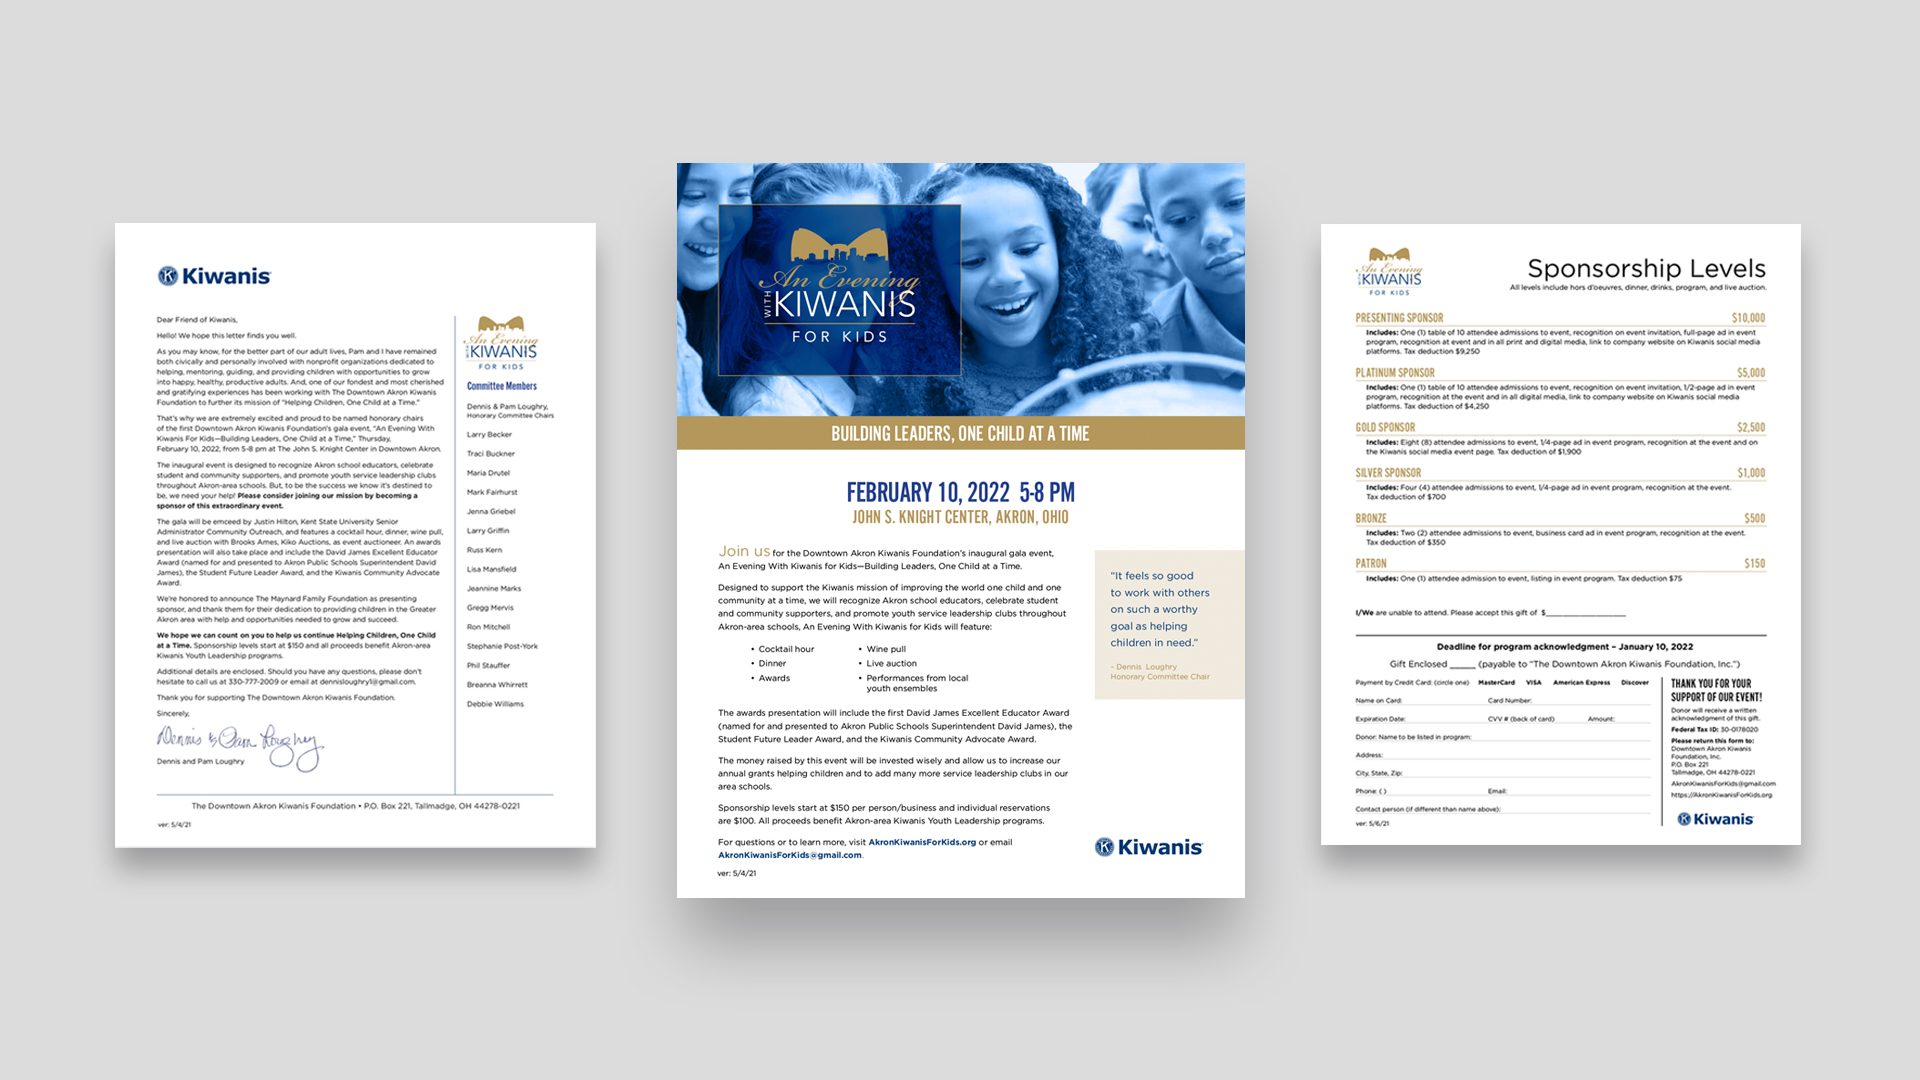 Print and digital collateral materials to support fund-raising and calls for sponsors